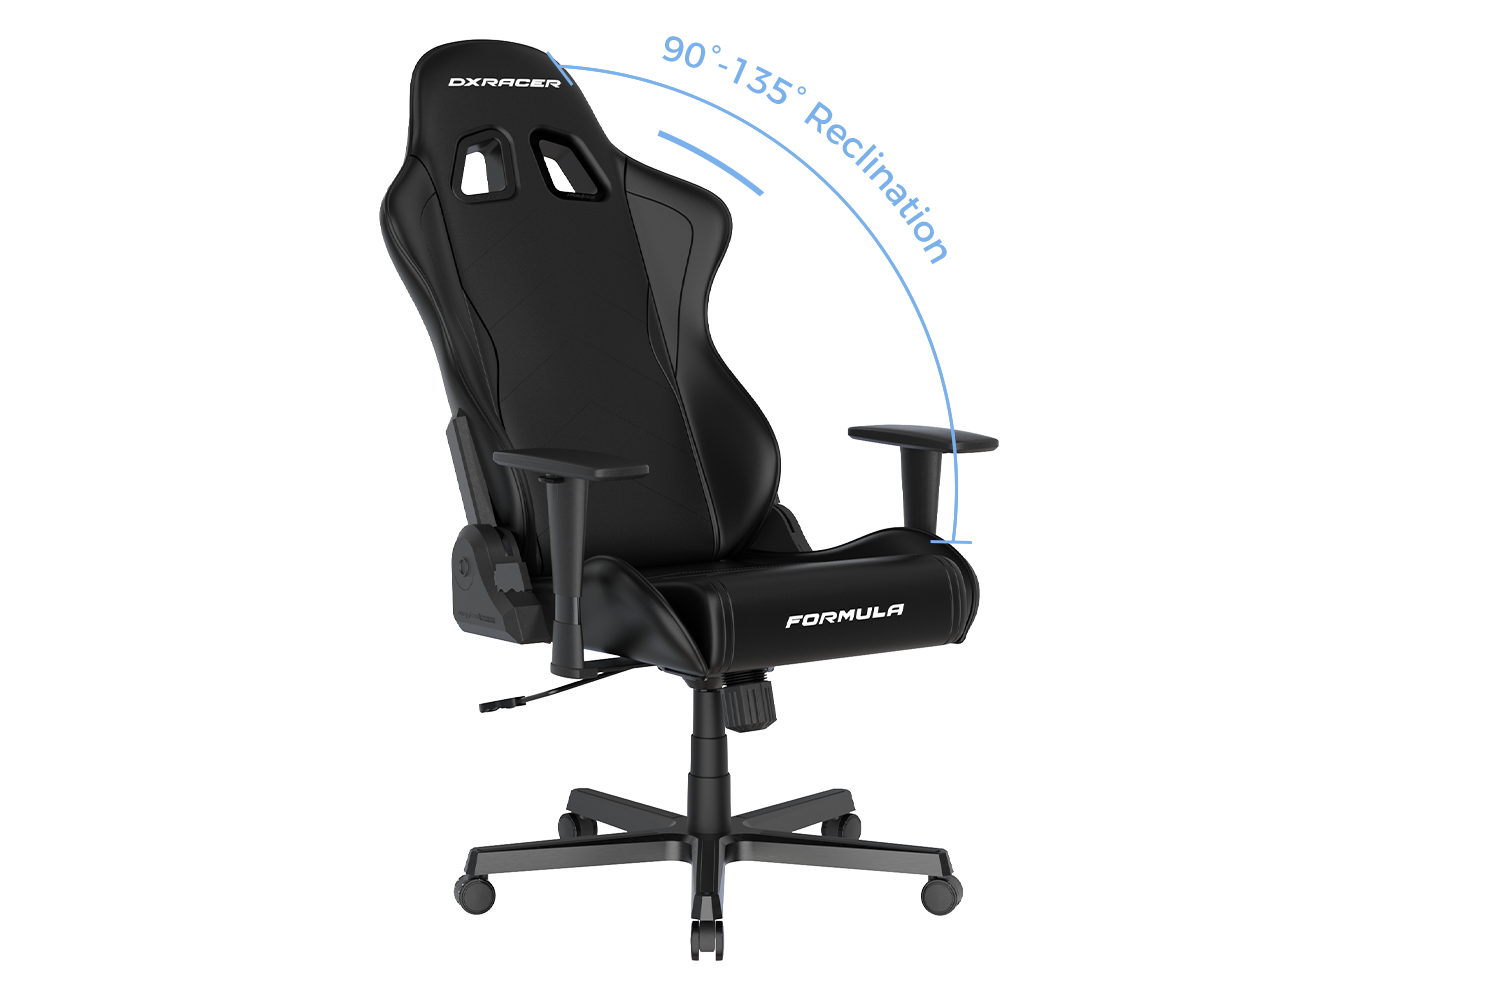 FD01 Black & Red / Chair Water-Resistant Regular Gaming DXRacer | | USA | Formula | L Fabric Series